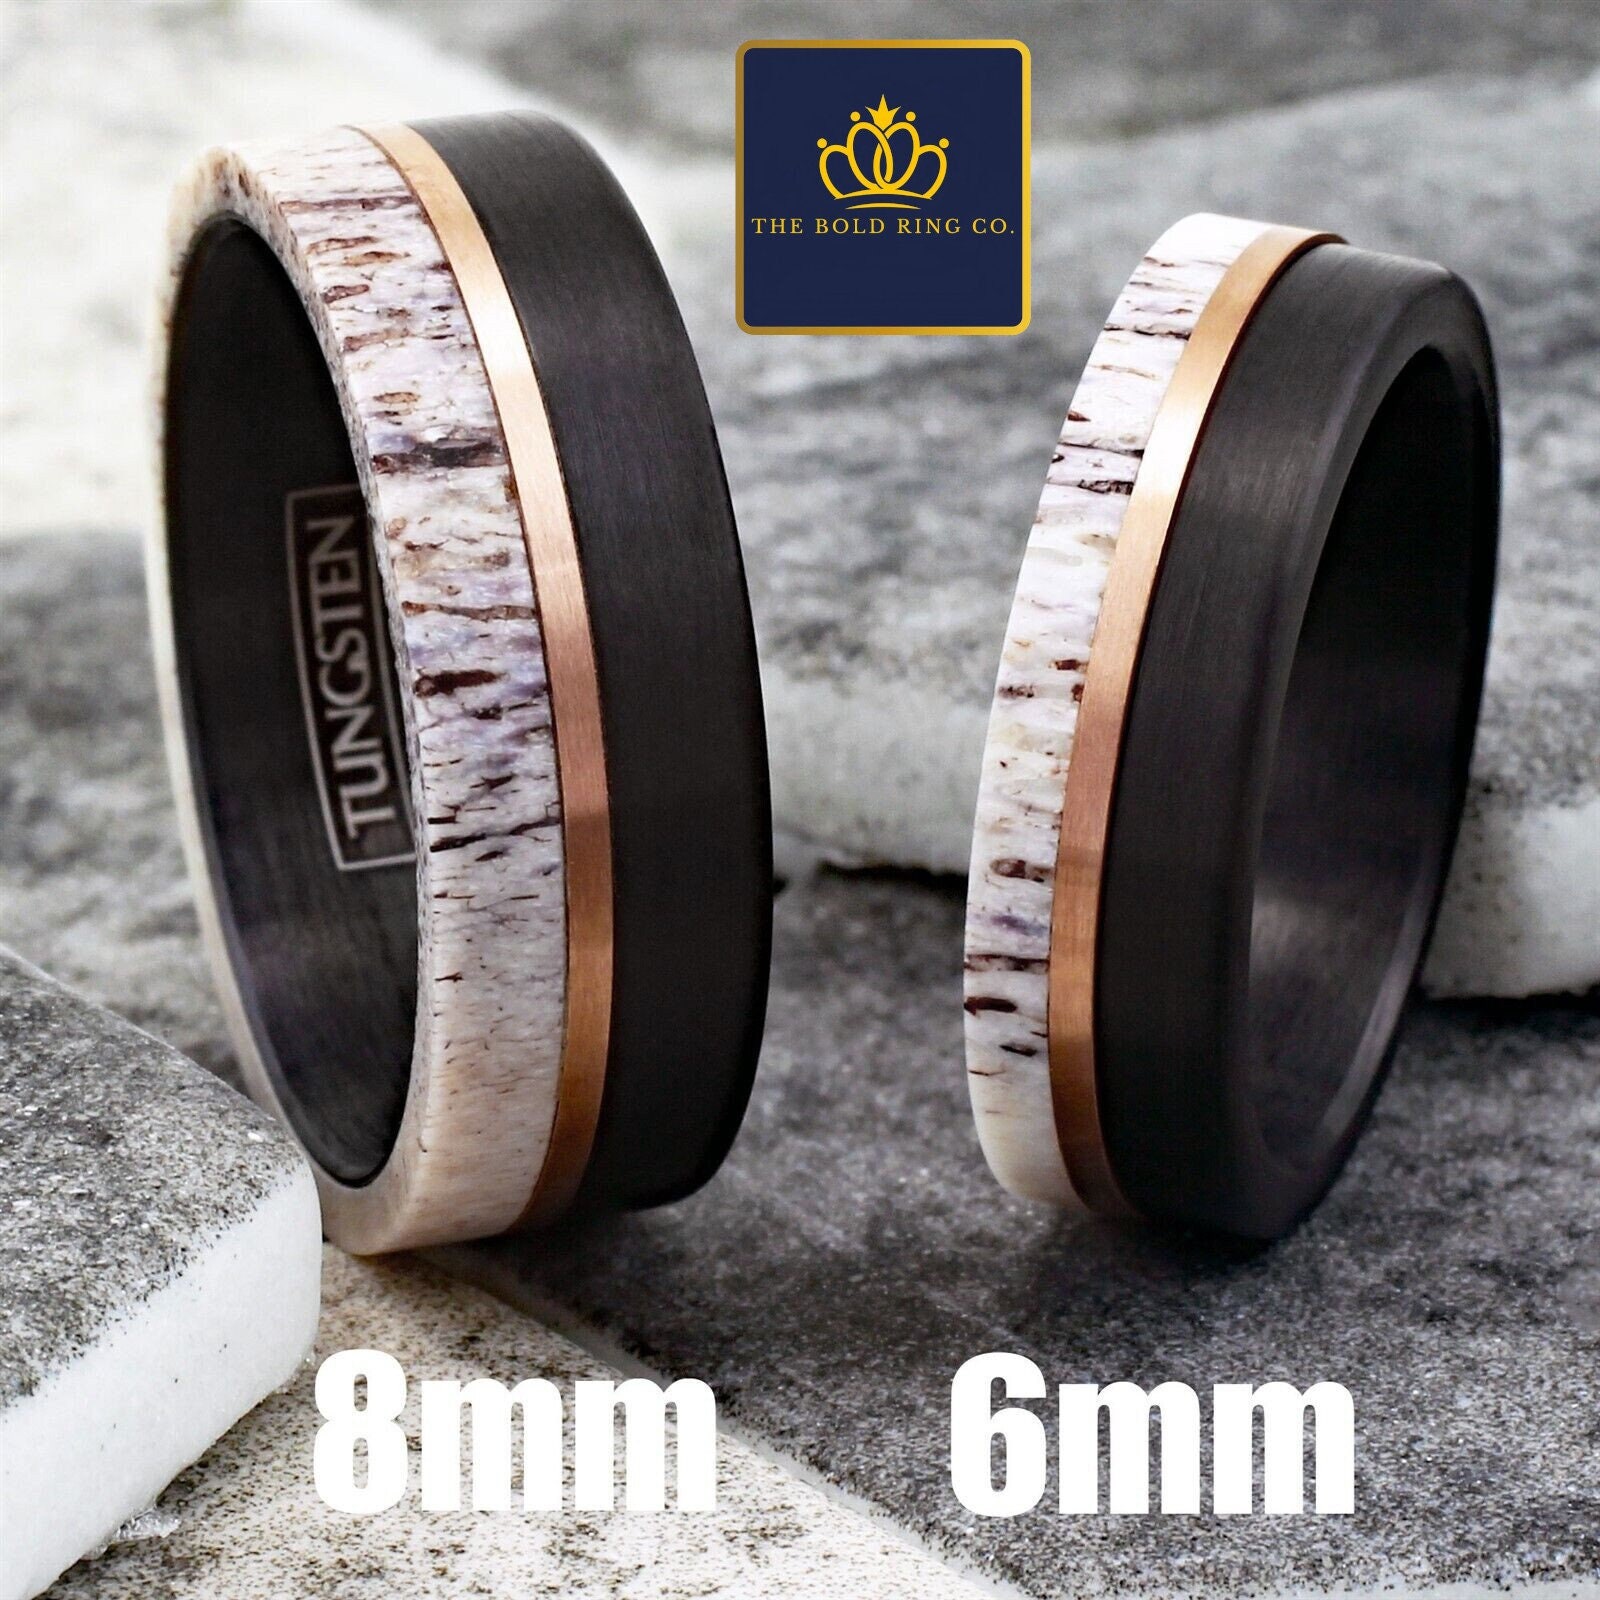 Tungsten Wedding Bands Set, Tungsten Wedding Ring, Promise Wedding Bands,  His and Her Promise Rings, Couple Ring, His and Hers Match Set 